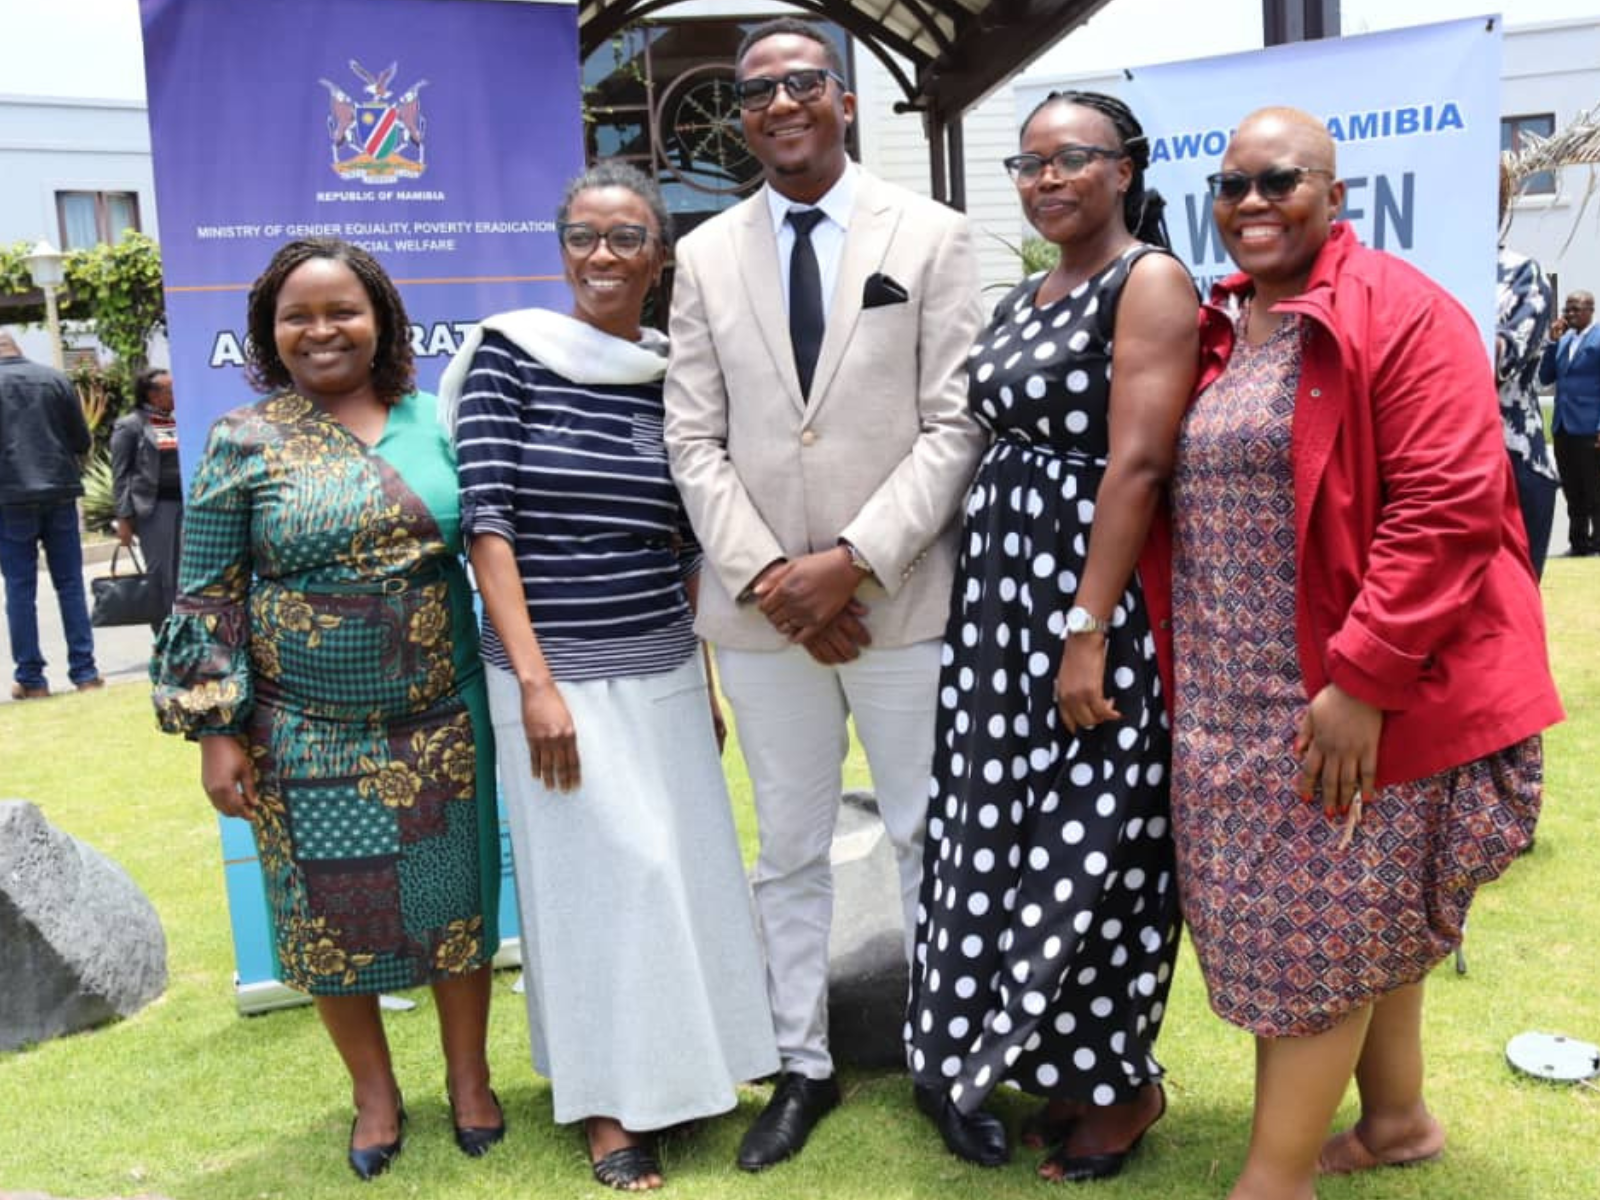 Tuyenikelao Dishena (second from left) is the only Namibia candidate who qualified for the Start and Improve Your Business package Master Trainer certification to train trainers of women entrpreneurs. Photo courtesy of Tuyenikelao Dishena